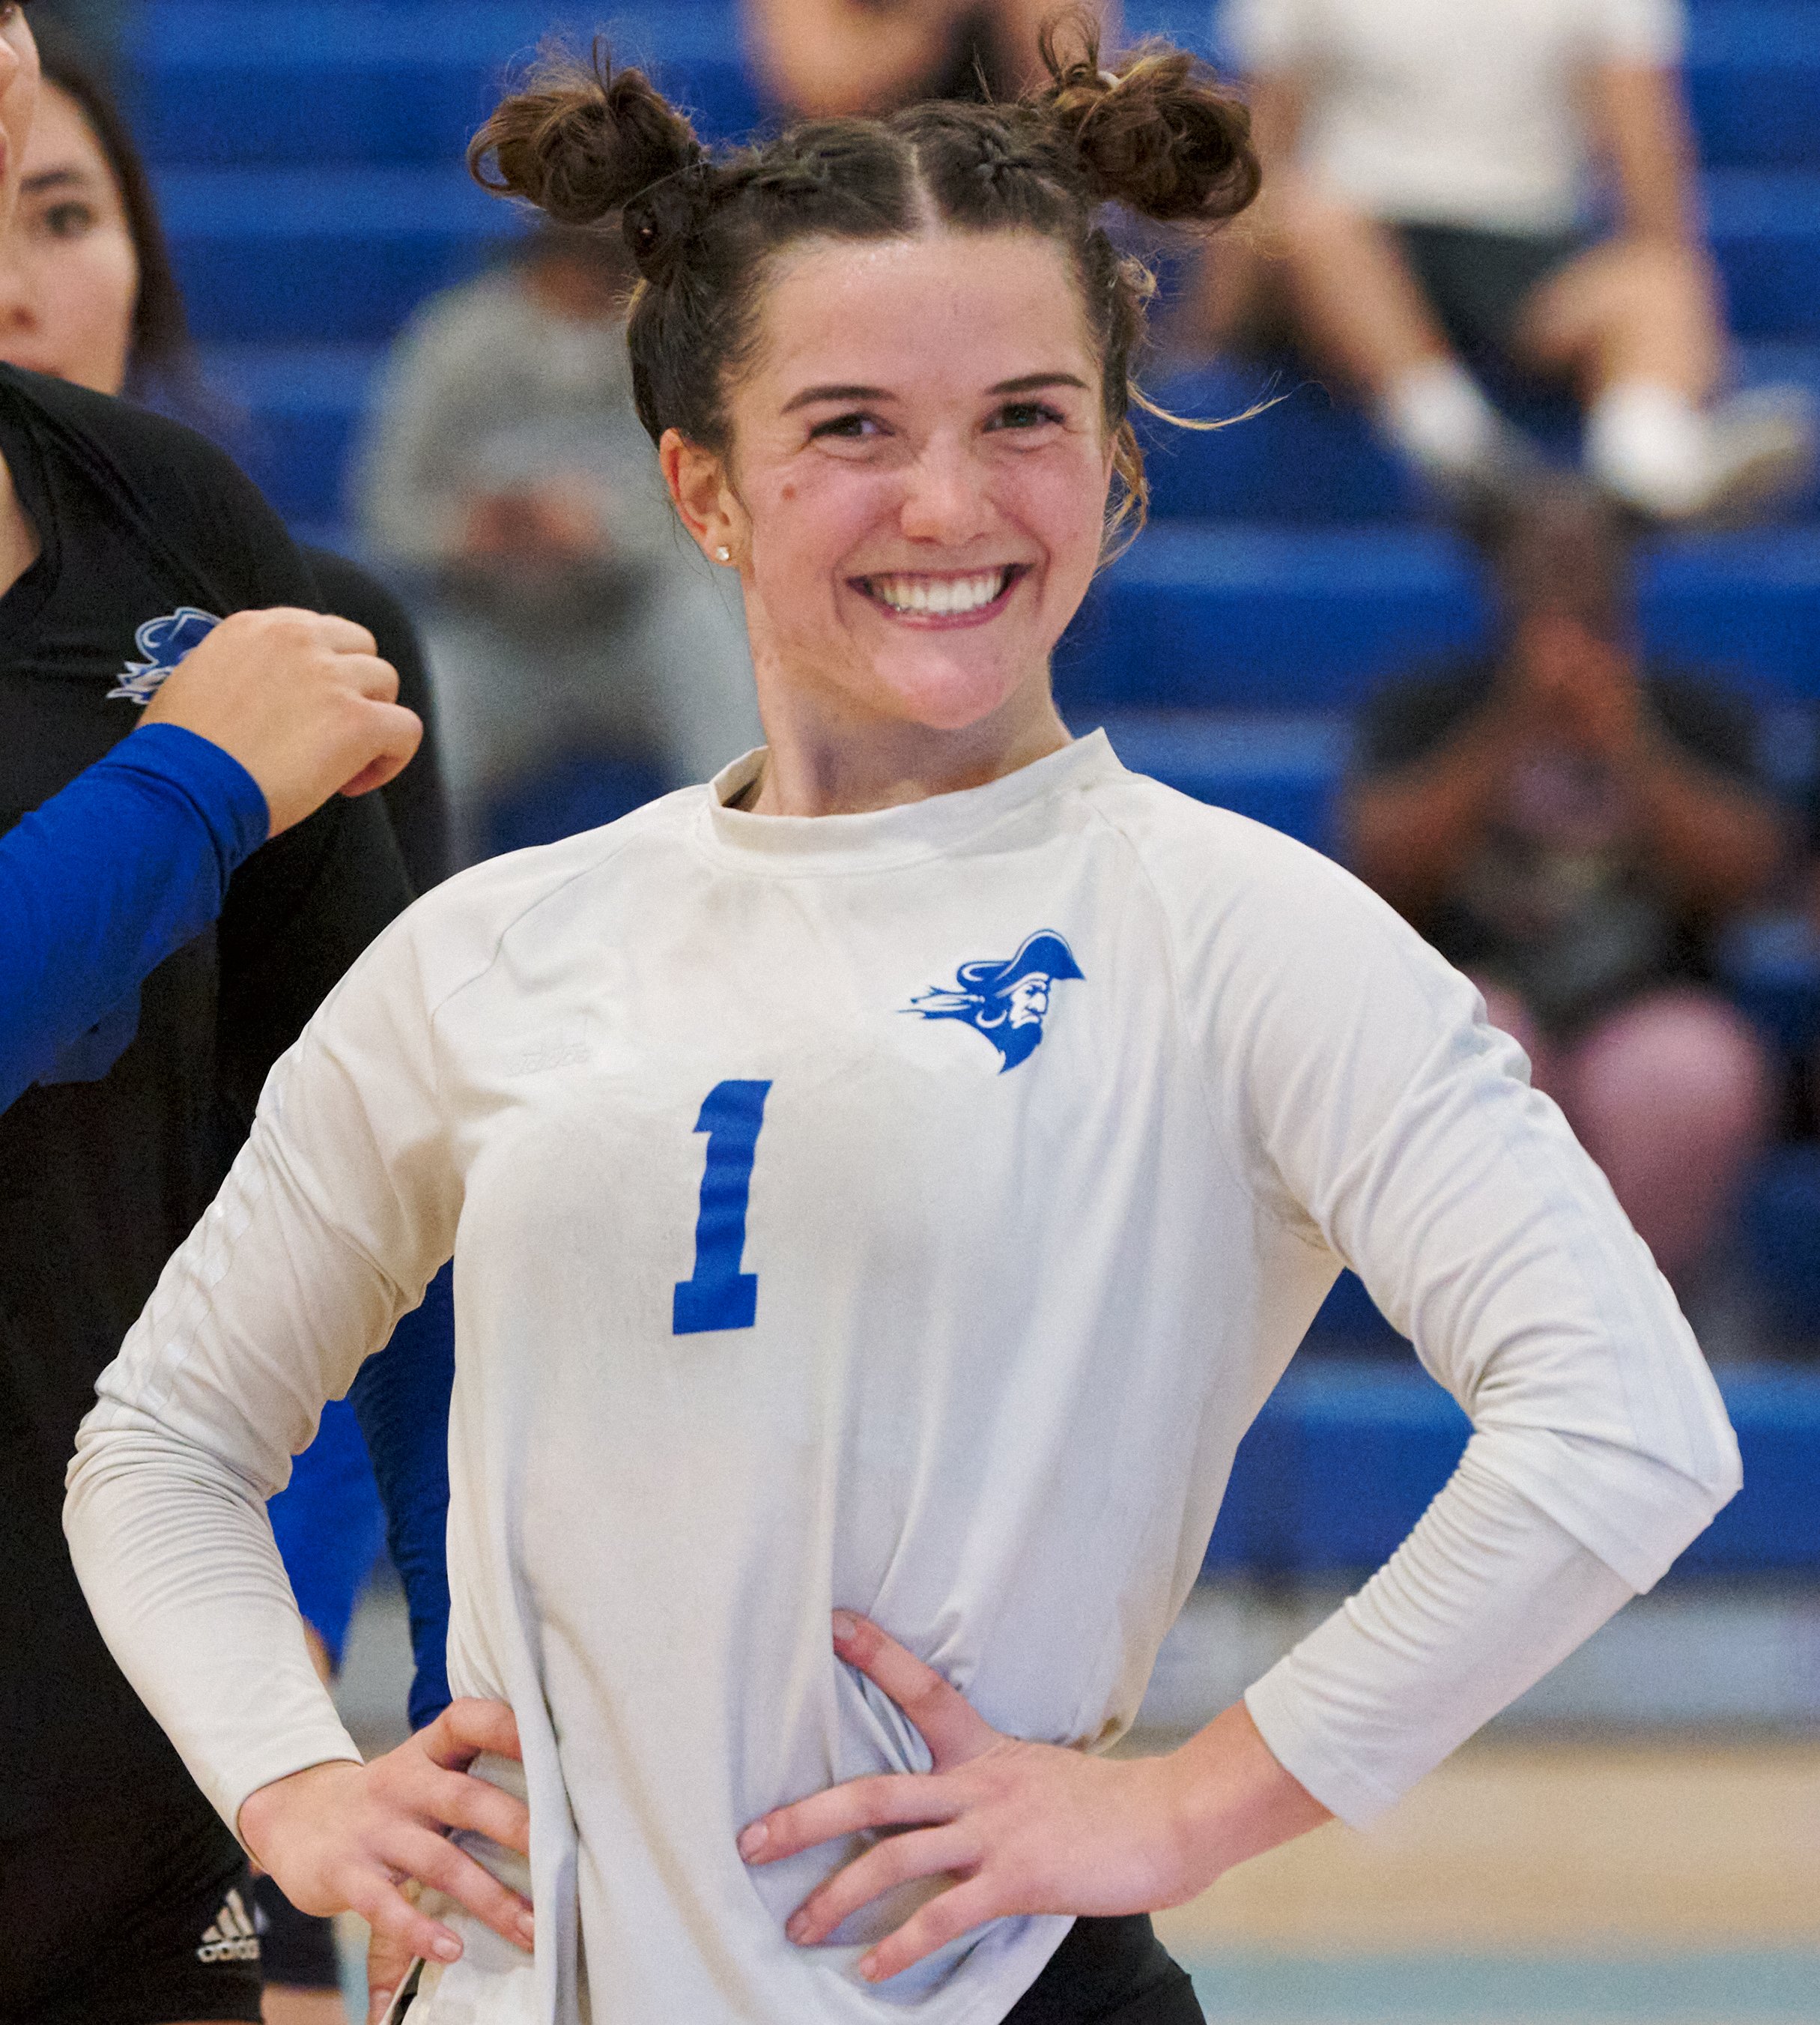  Santa Monica College Corsairs' Halle Anderson stops to pose during the women's volleyball match against the Moorpark College Raiders on Friday, Sept. 23, 2022, at the Corsair Gym in Santa Monica, Calif. The Corsairs won 3-2. (Nicholas McCall | The C